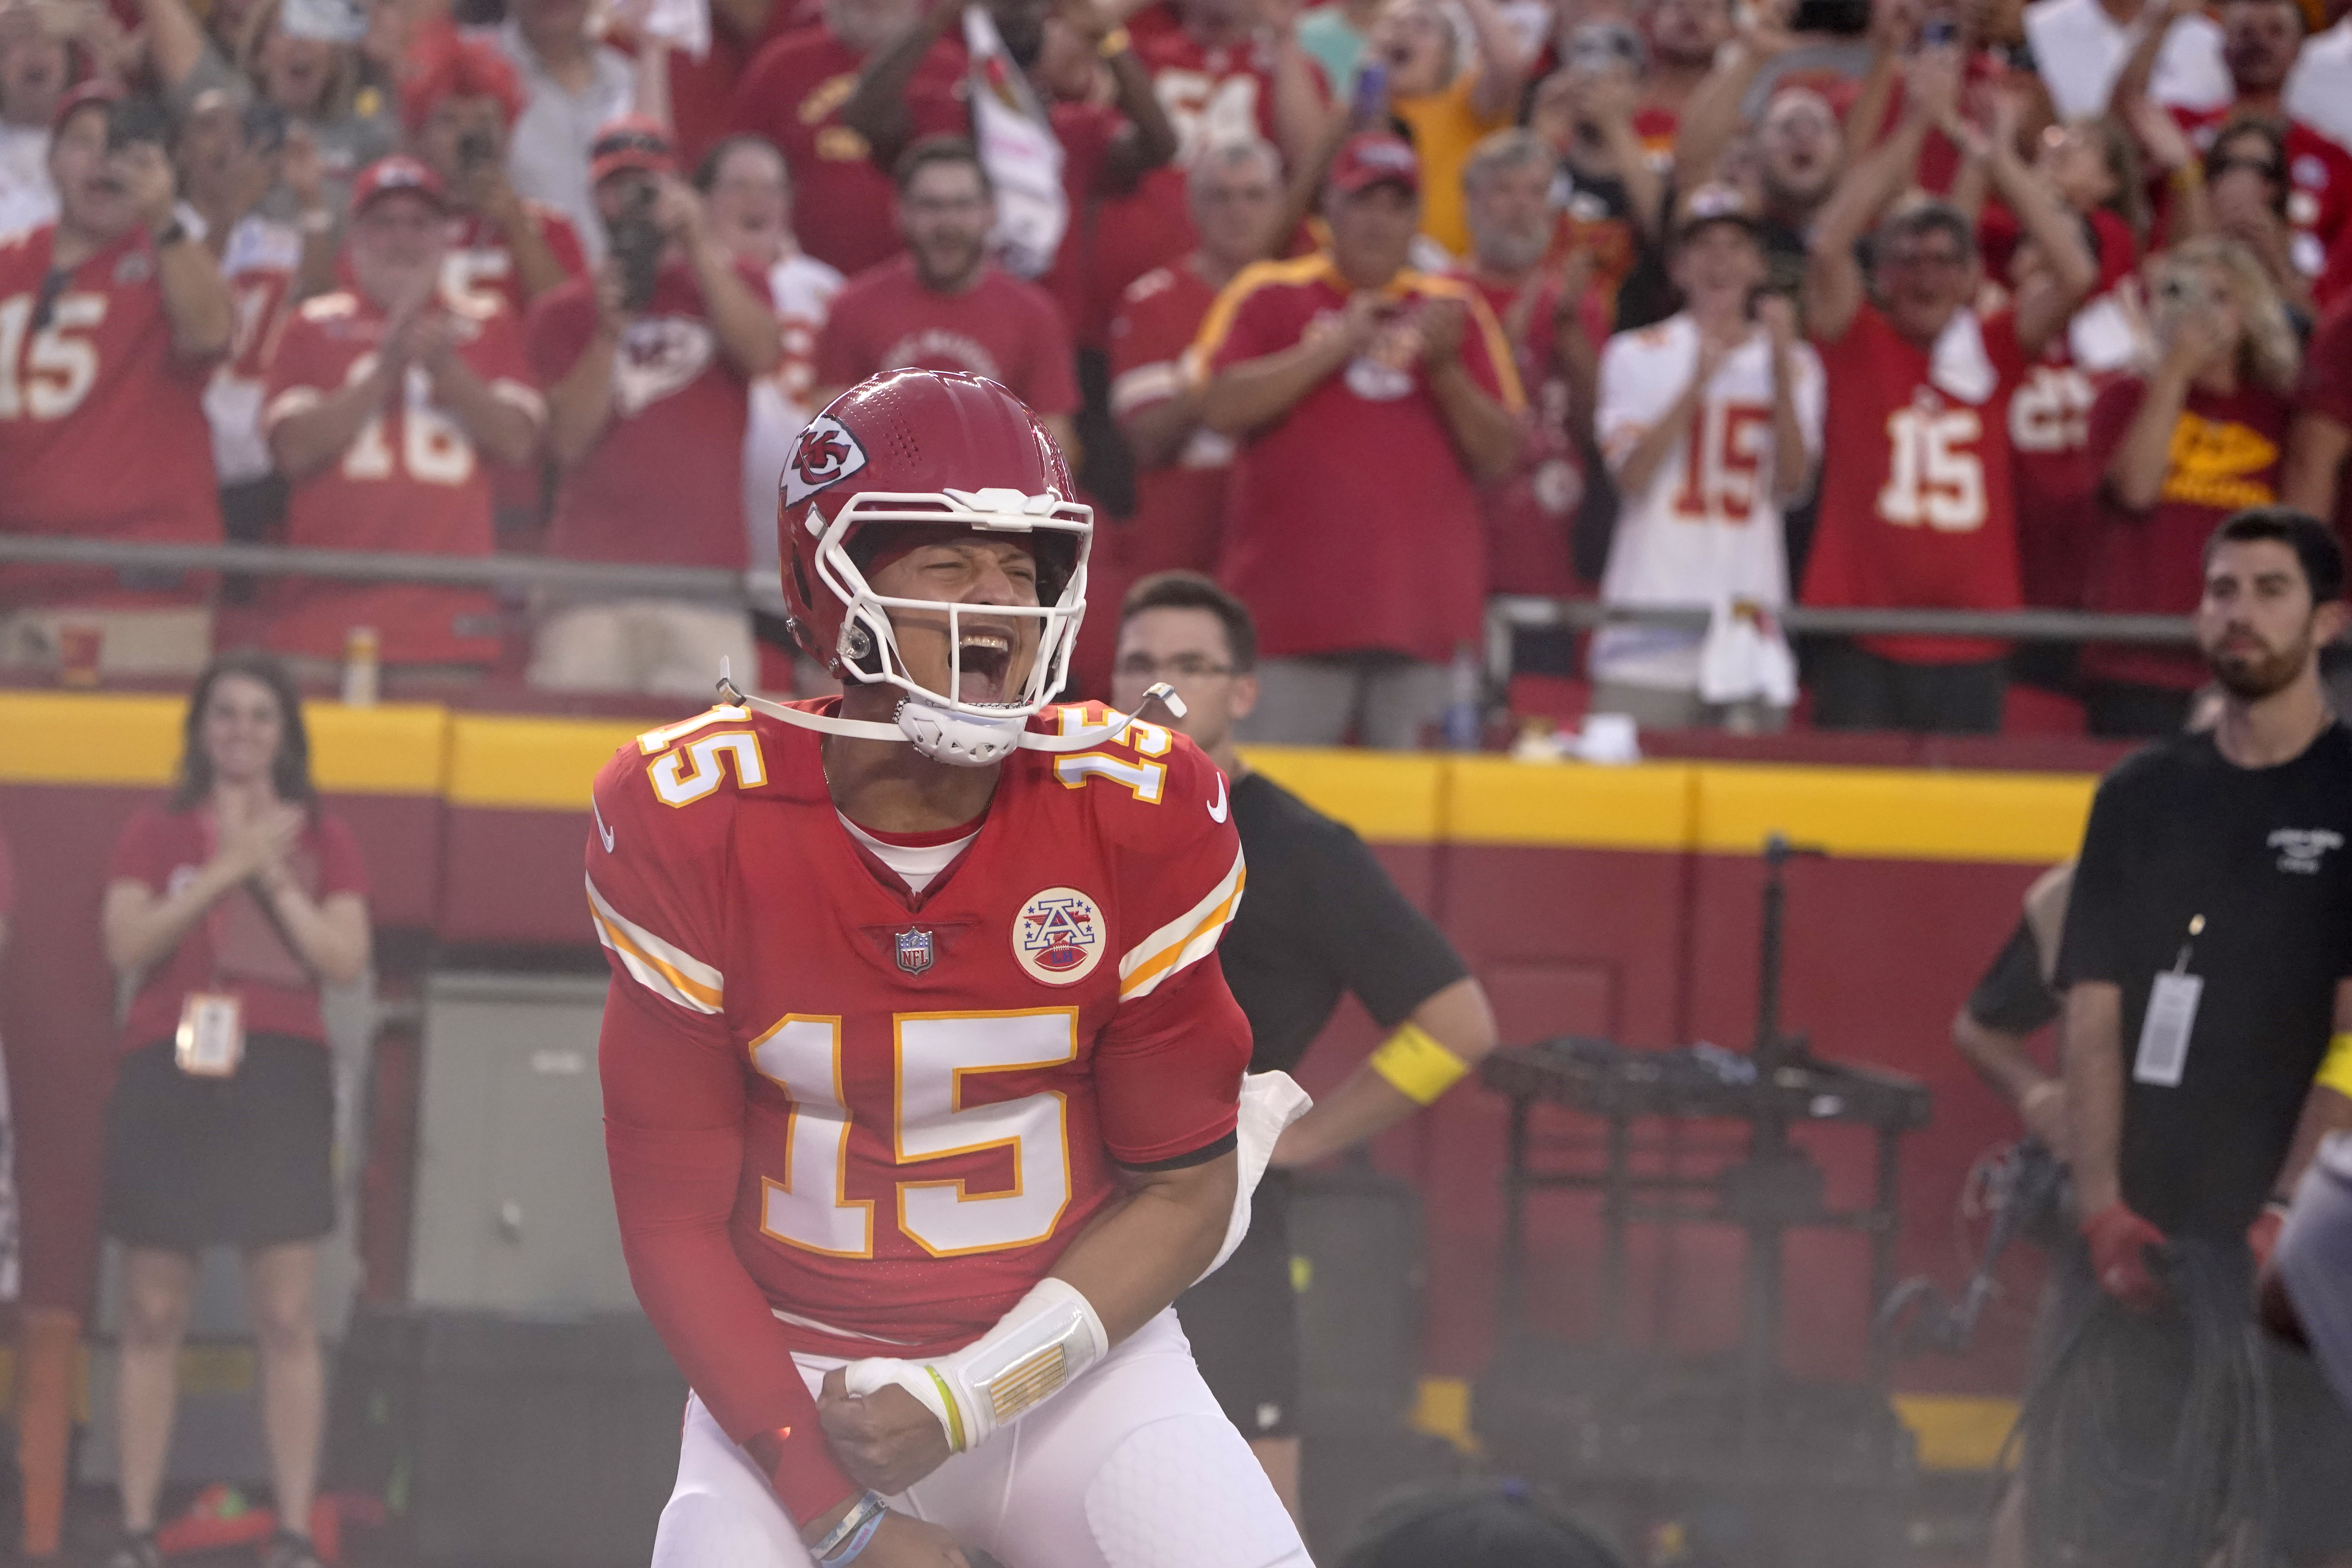 Chiefs come back to take down Chargers 27-24 in home opener